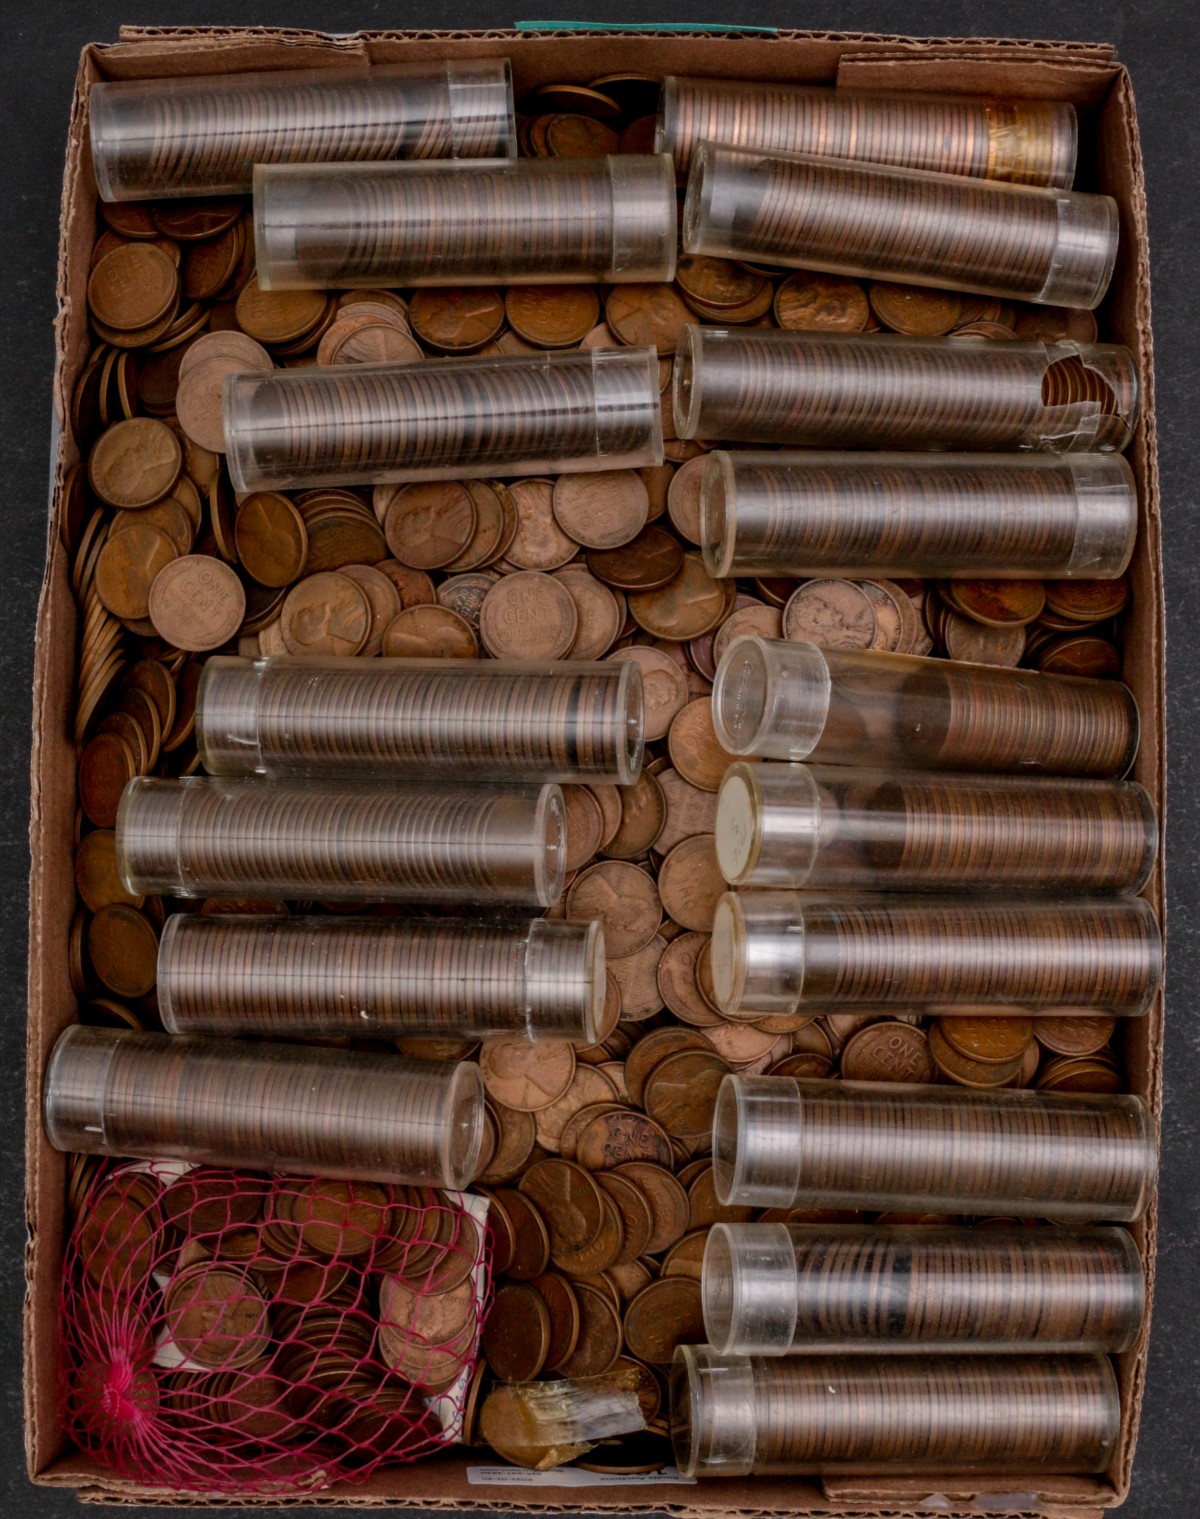 27 POUNDS OF UNSORTED ROLLED U.S. WHEAT PENNIES